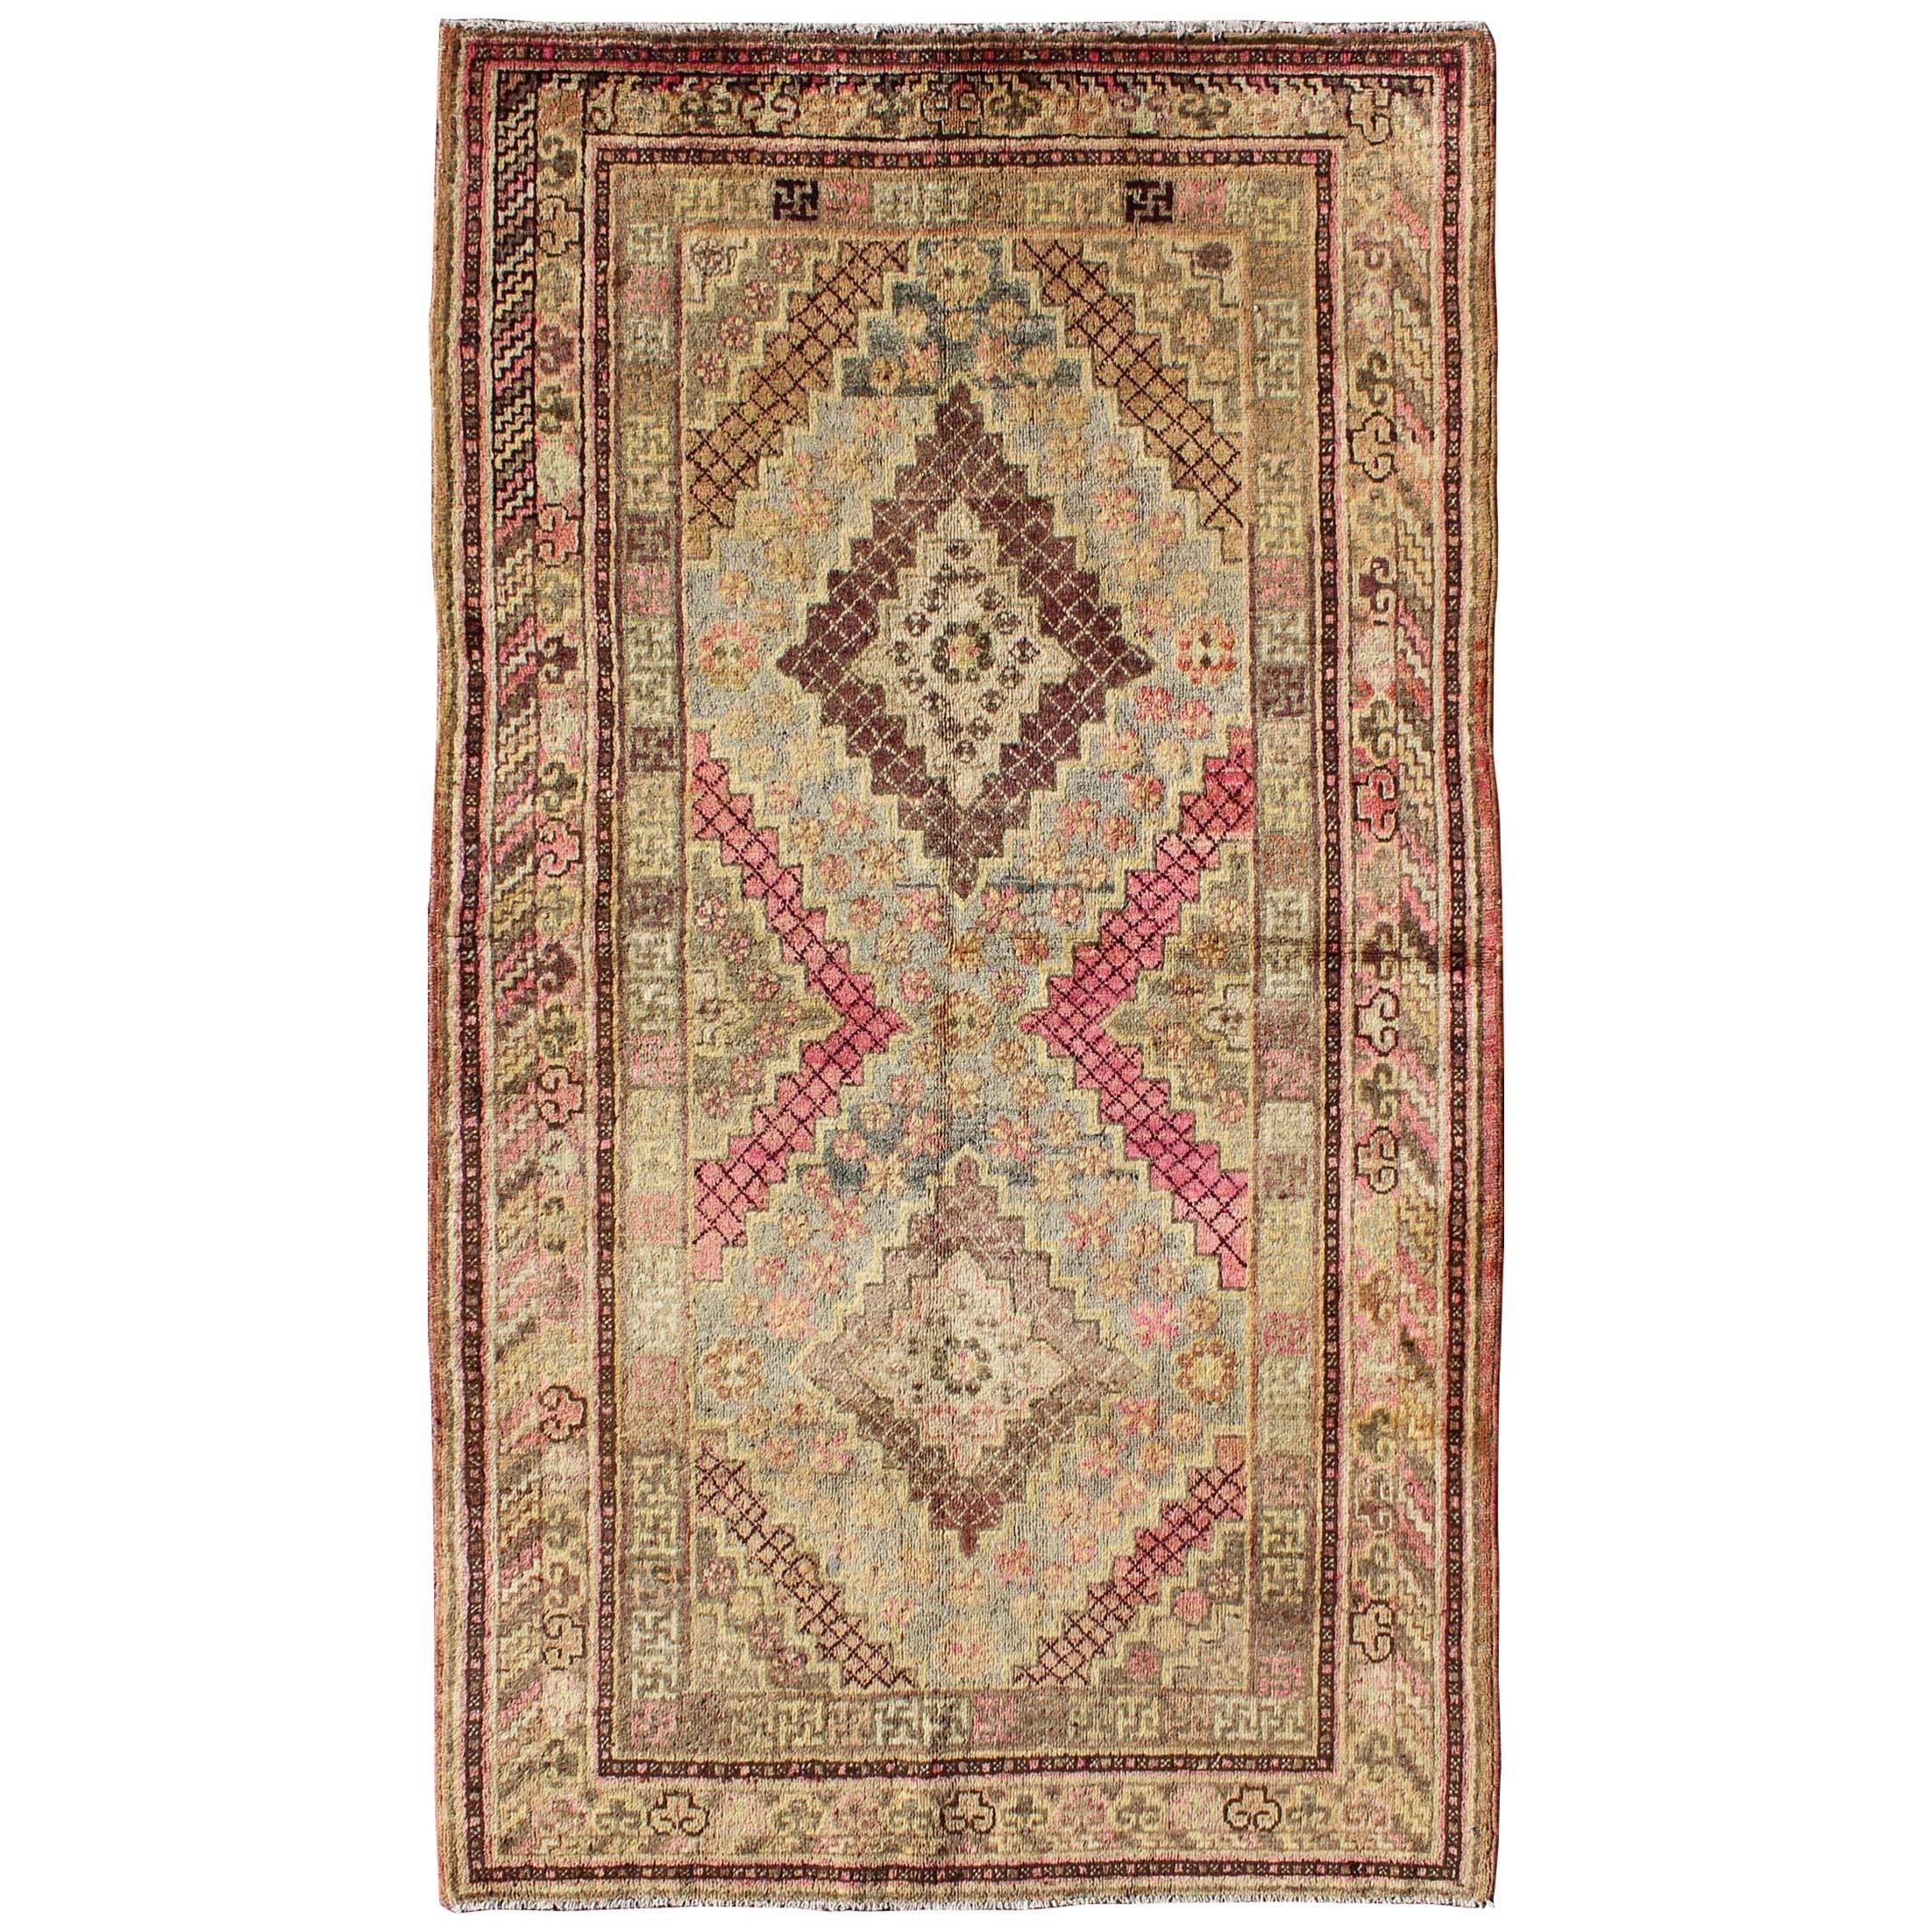 Early 20th Century Antique Khotan Rug with Paired Diamond Medallions in Wine Red For Sale